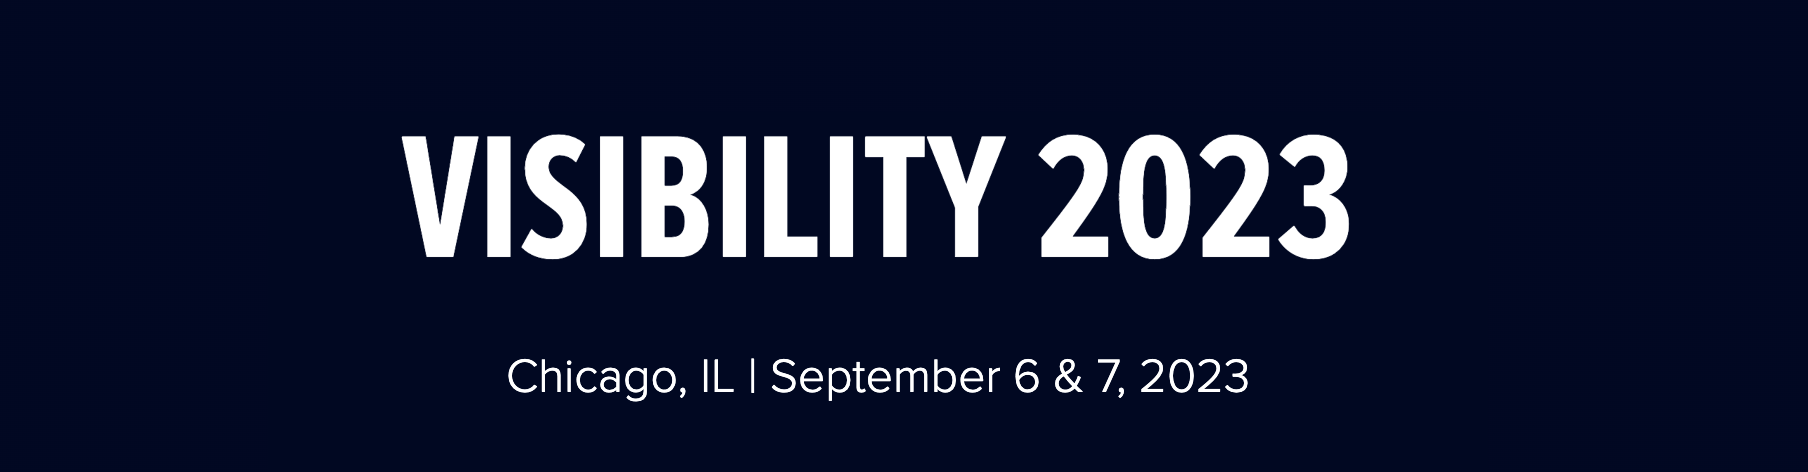 FourKites Visibility Conference 2023